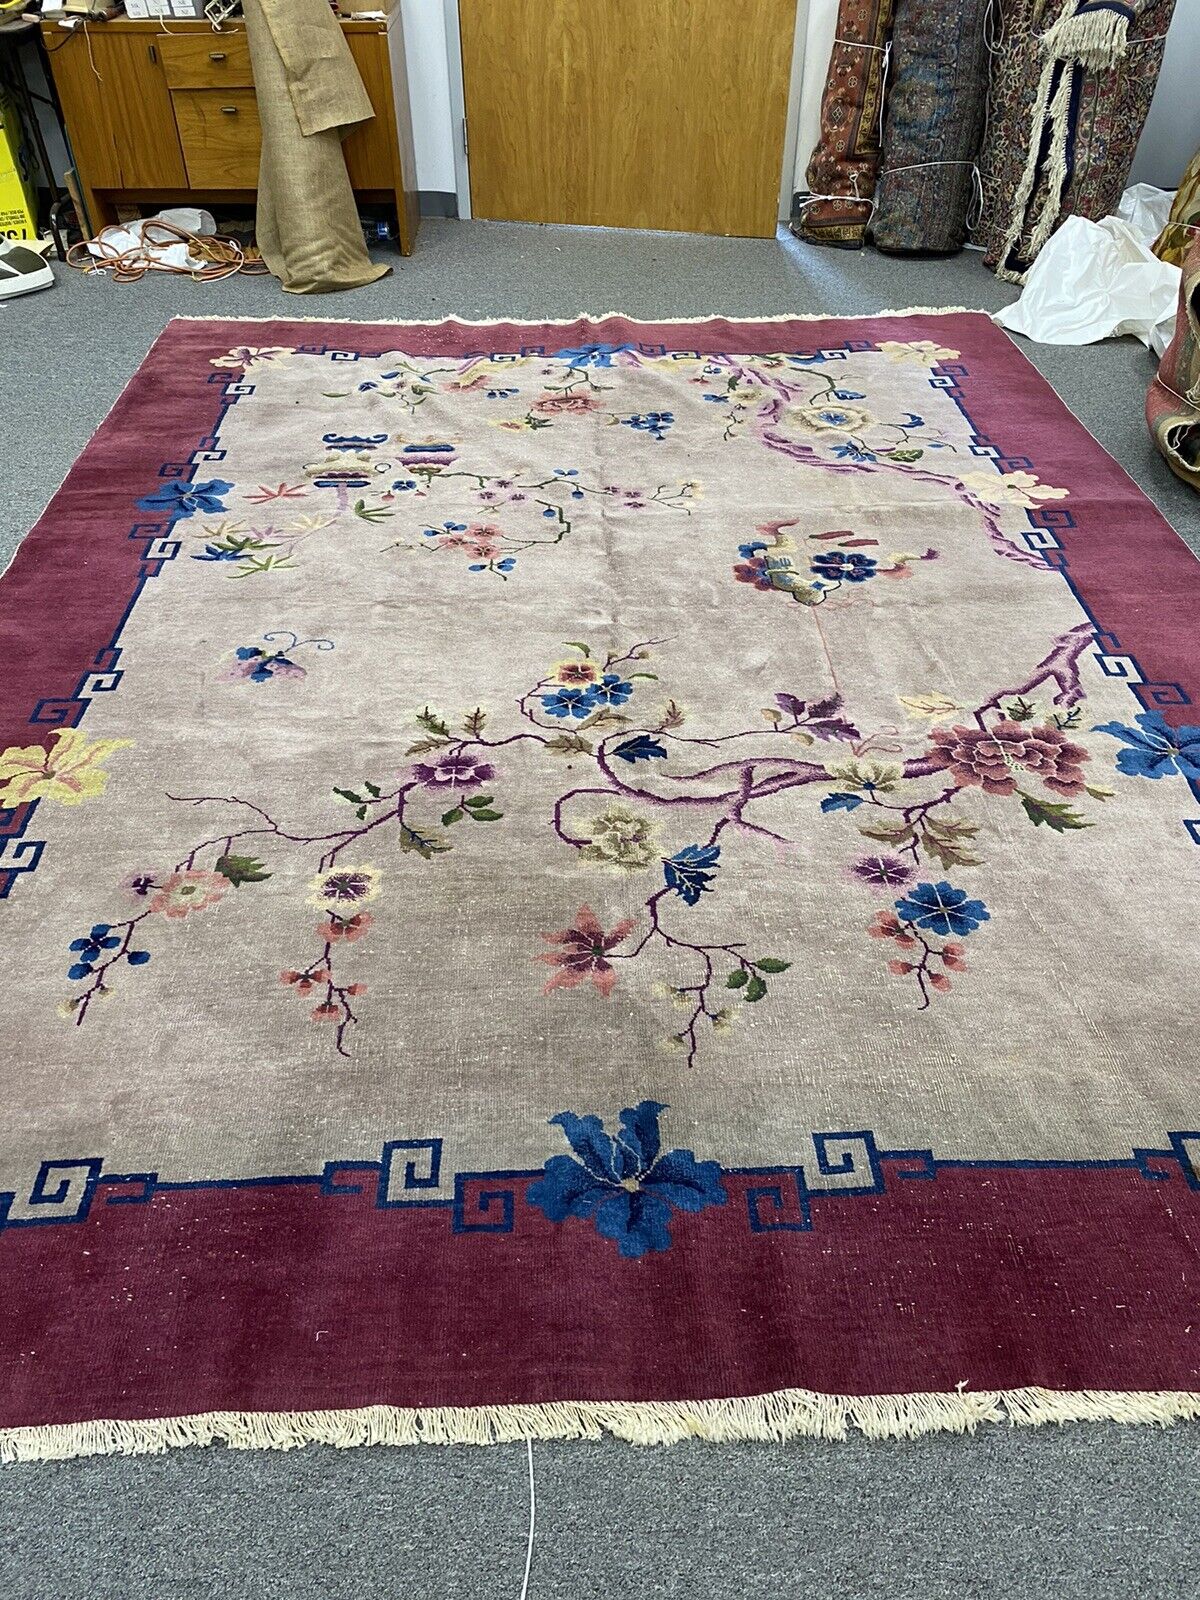 antique art deco chinese rug in good condition #9235. 9.0x11.4